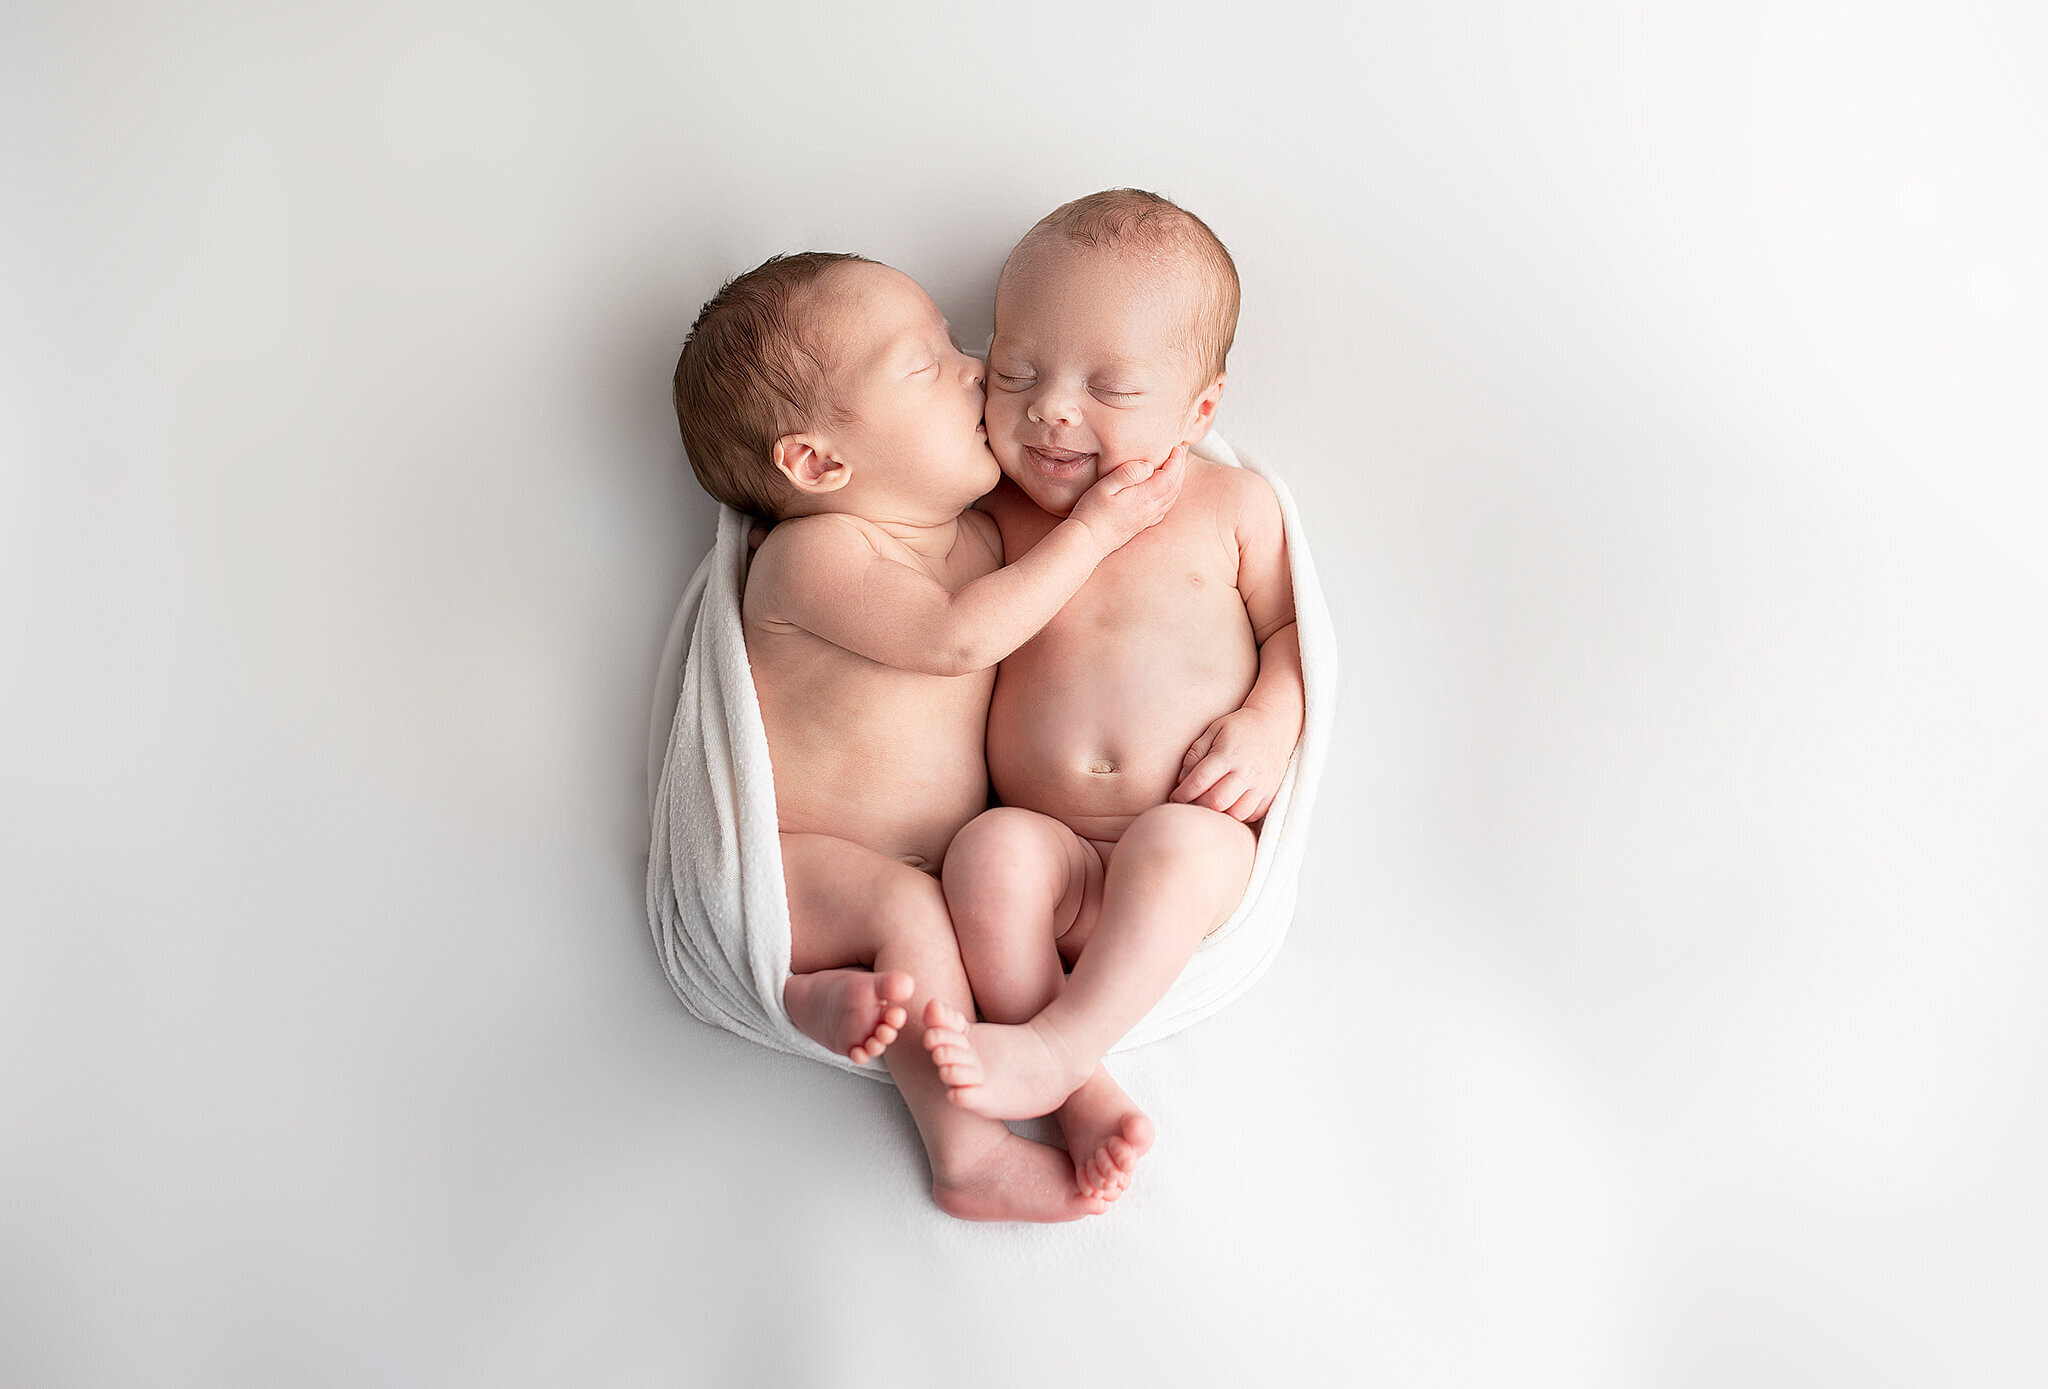 newborn twins snuggled together on a white blanket while one twin gives the other twin a kiss on the cheek